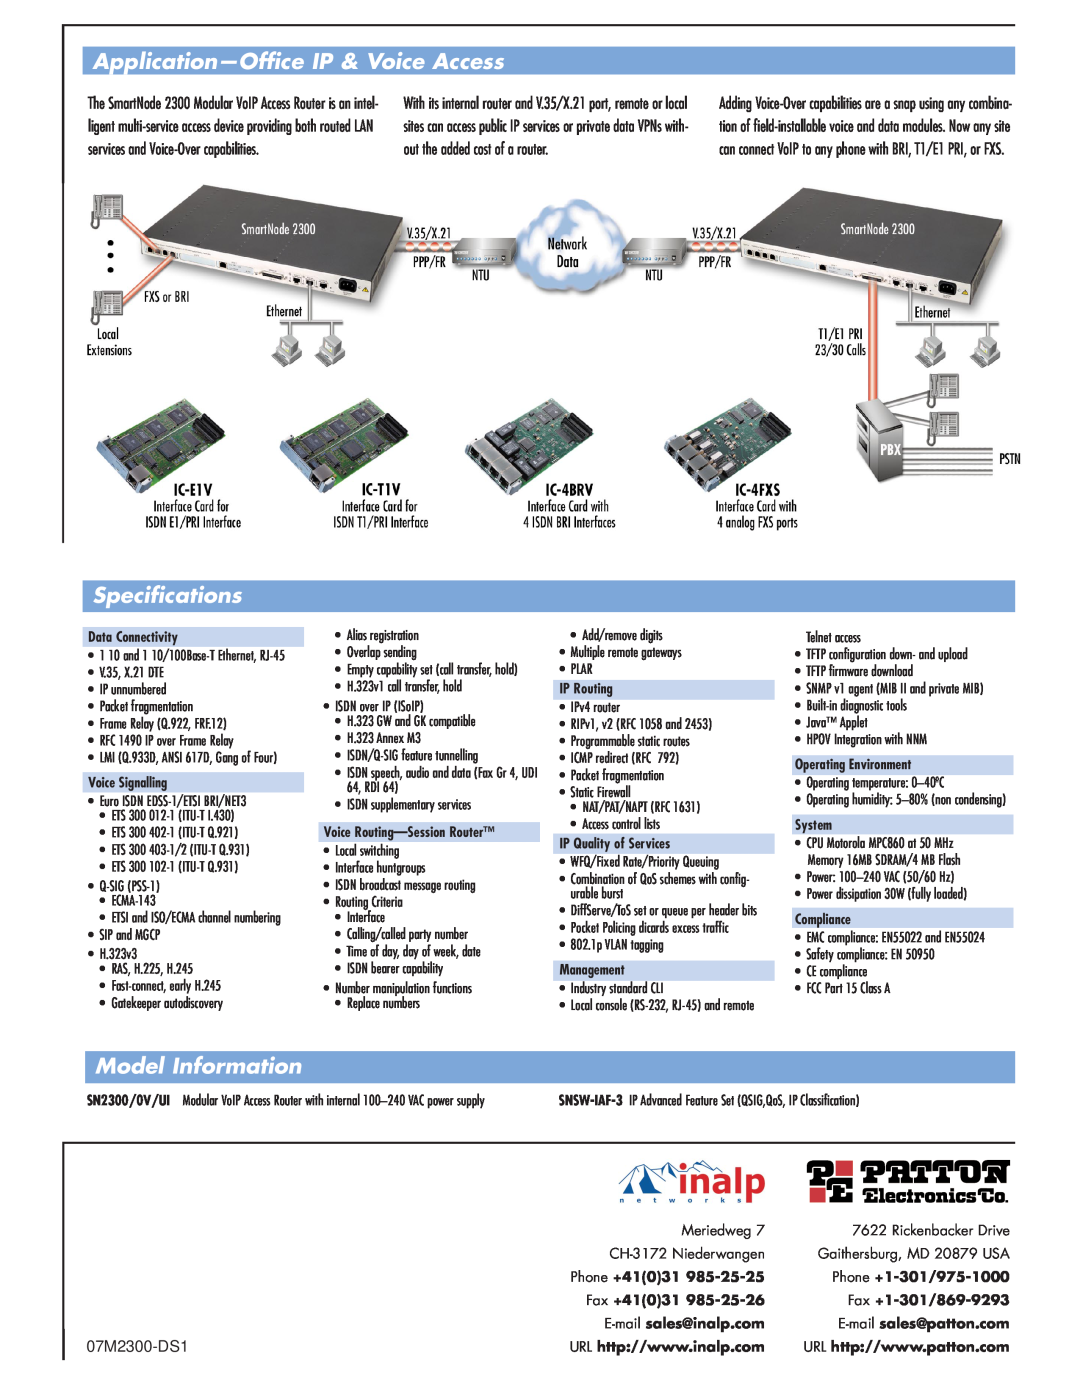 Patton electronic 2300 Series manual Application-Office IP & Voice Access, Specifications, Model Information, 07M2300-DS1 